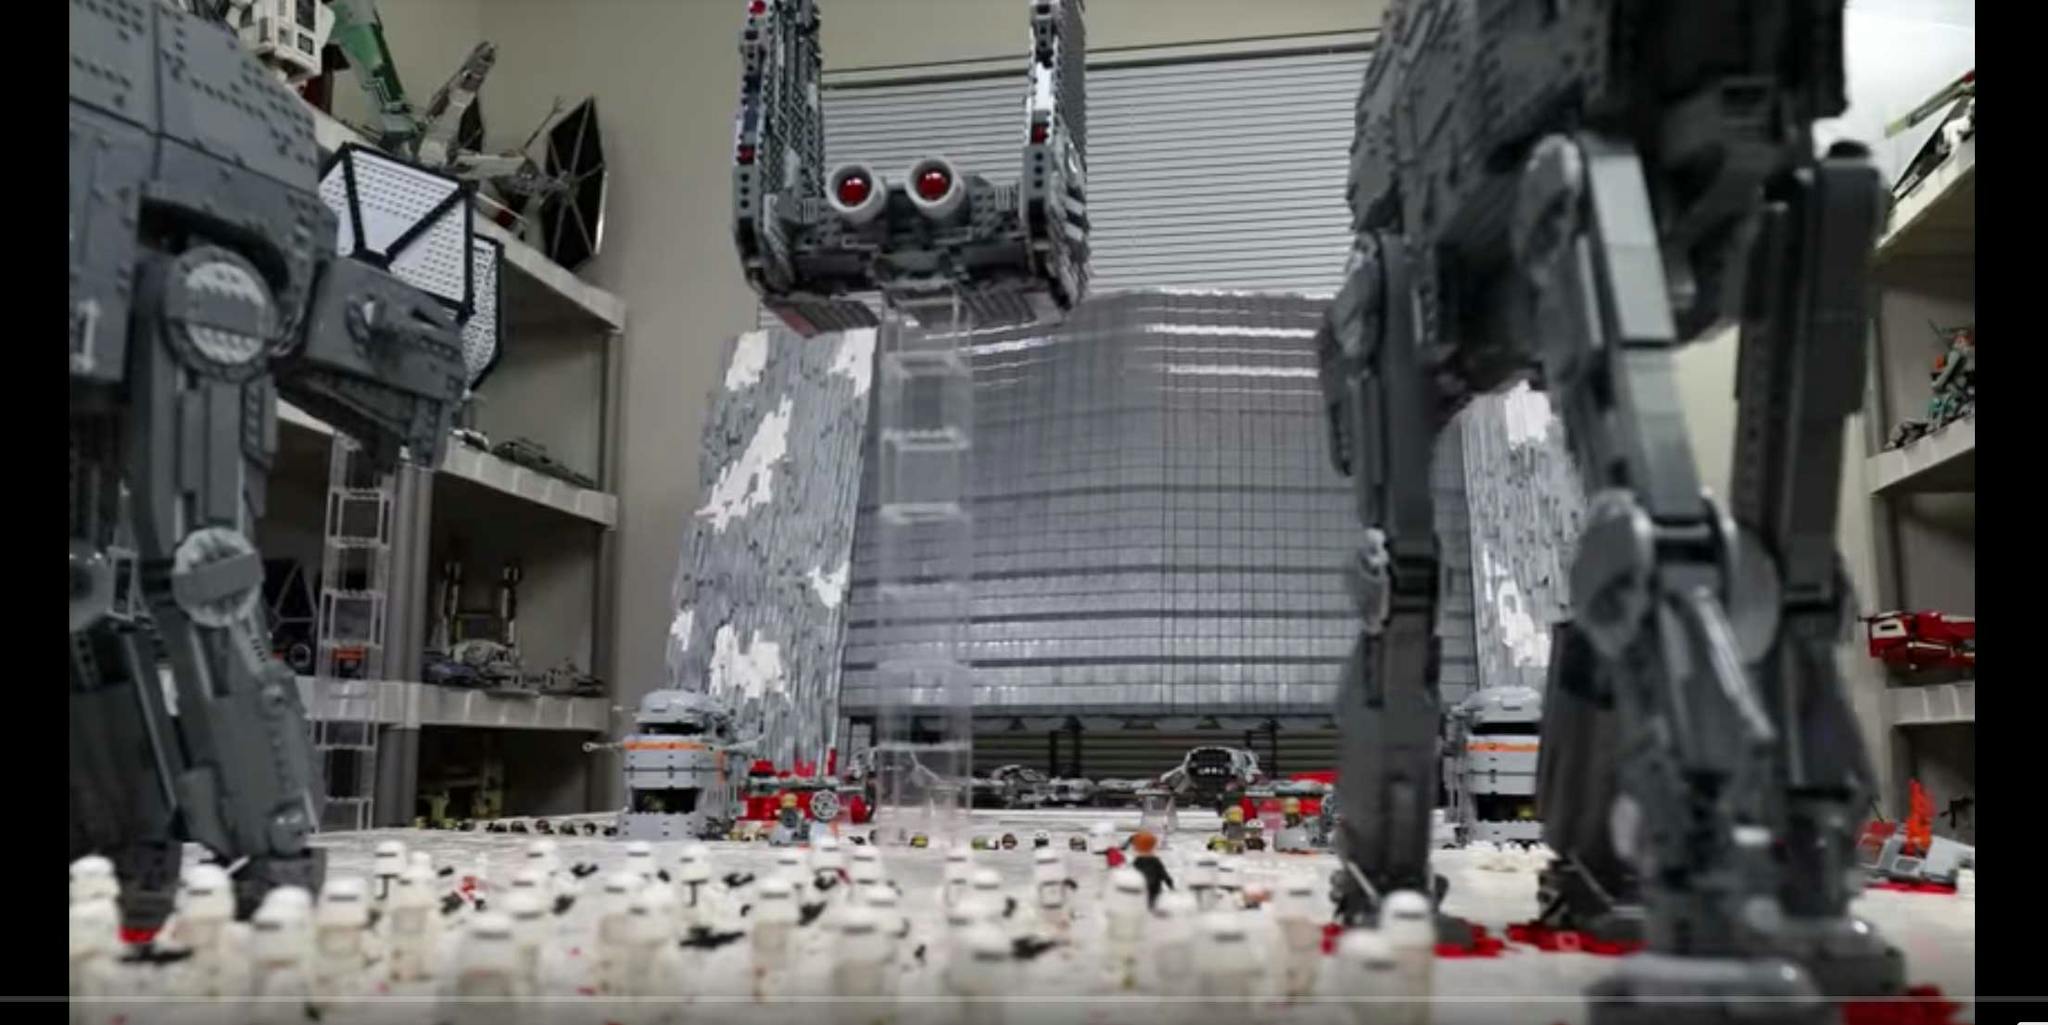 lego | The Daily Dot